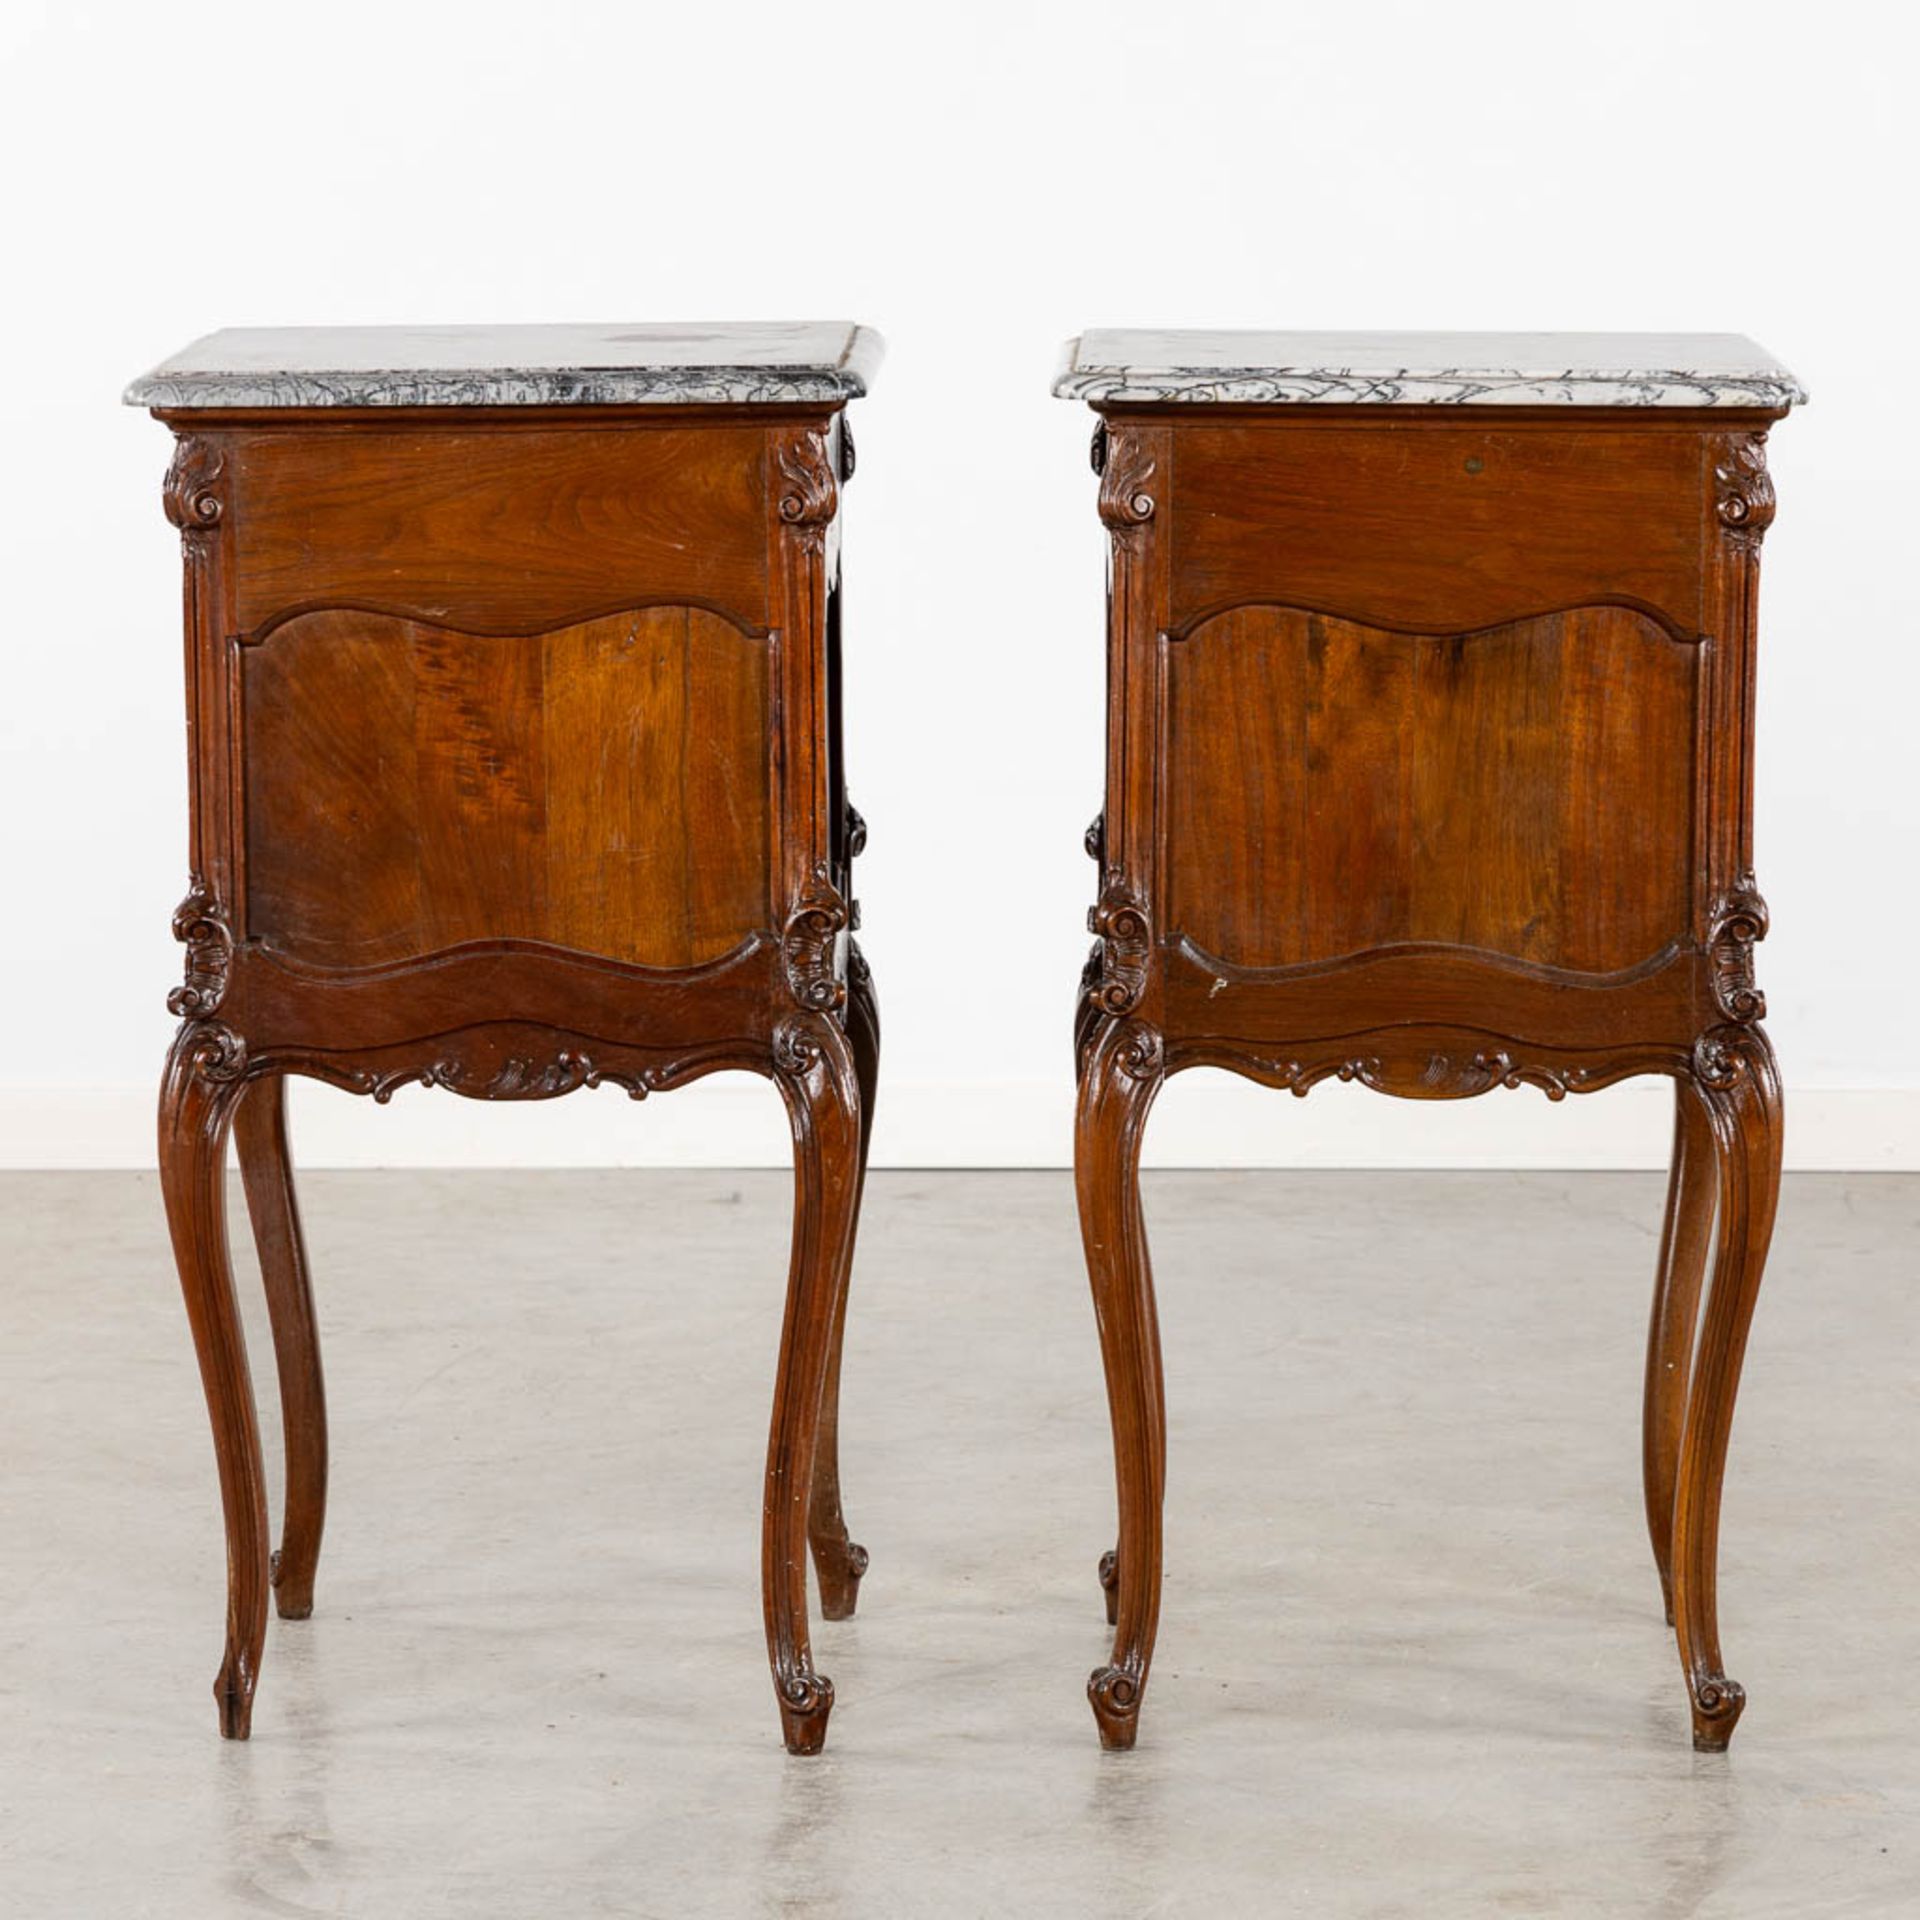 A pair of nightstands, Louis XV style with a marble top. (L:44 x W:44 x H:83 cm) - Image 5 of 12